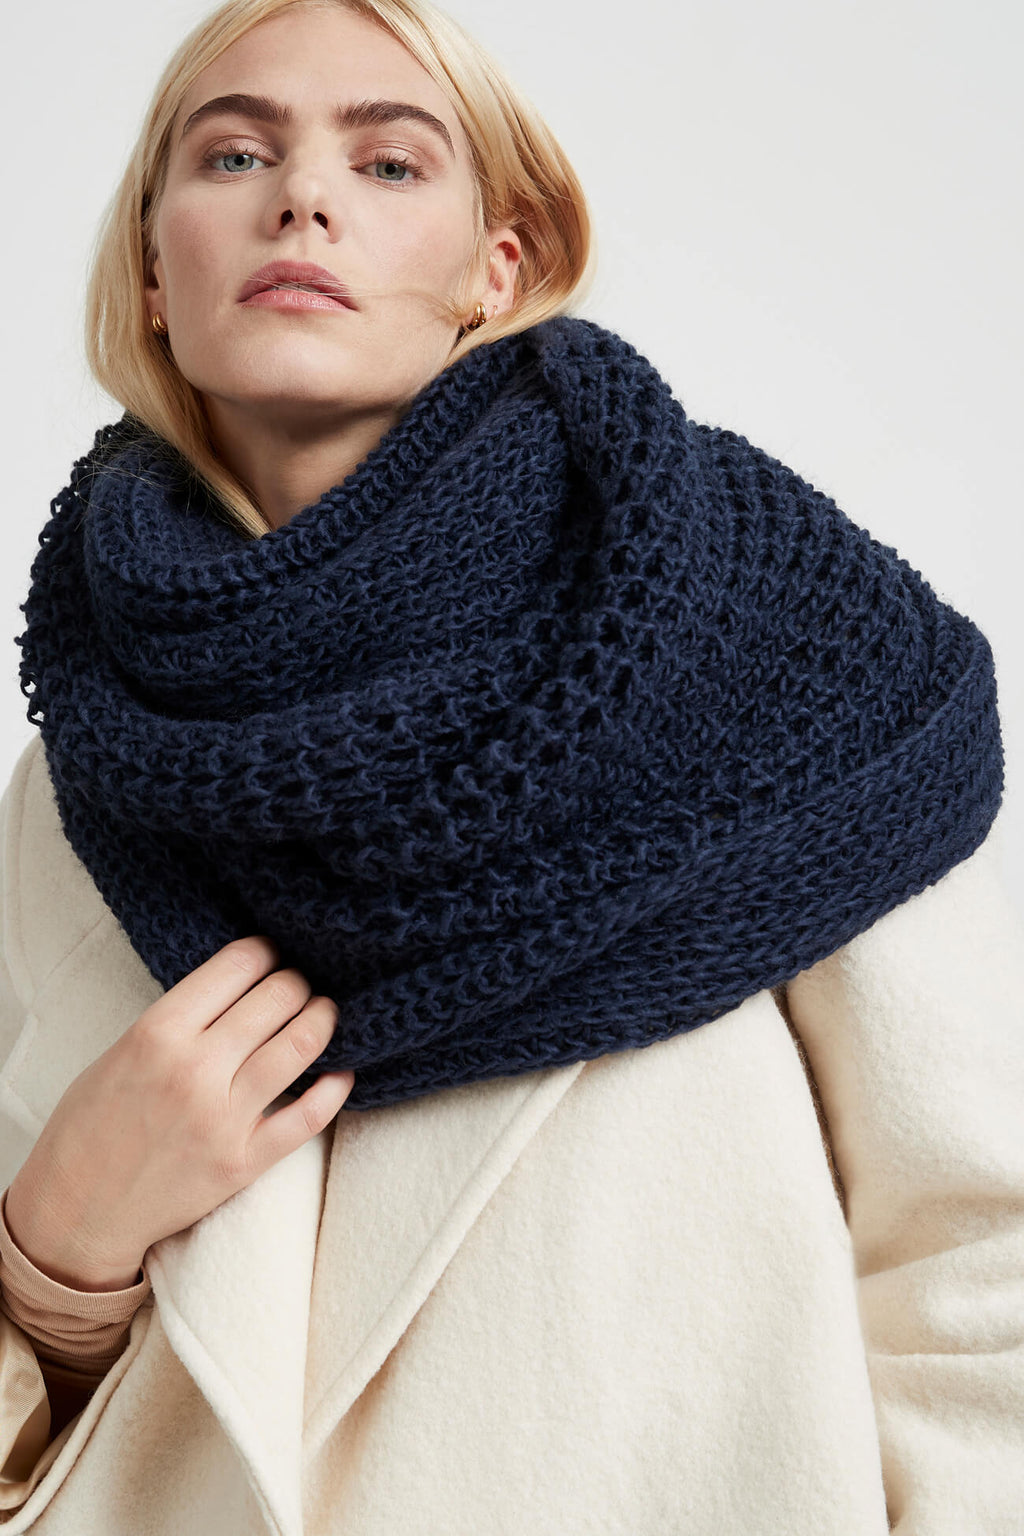 15 Best Affordable, Ethical, And Vegan Winter Scarves